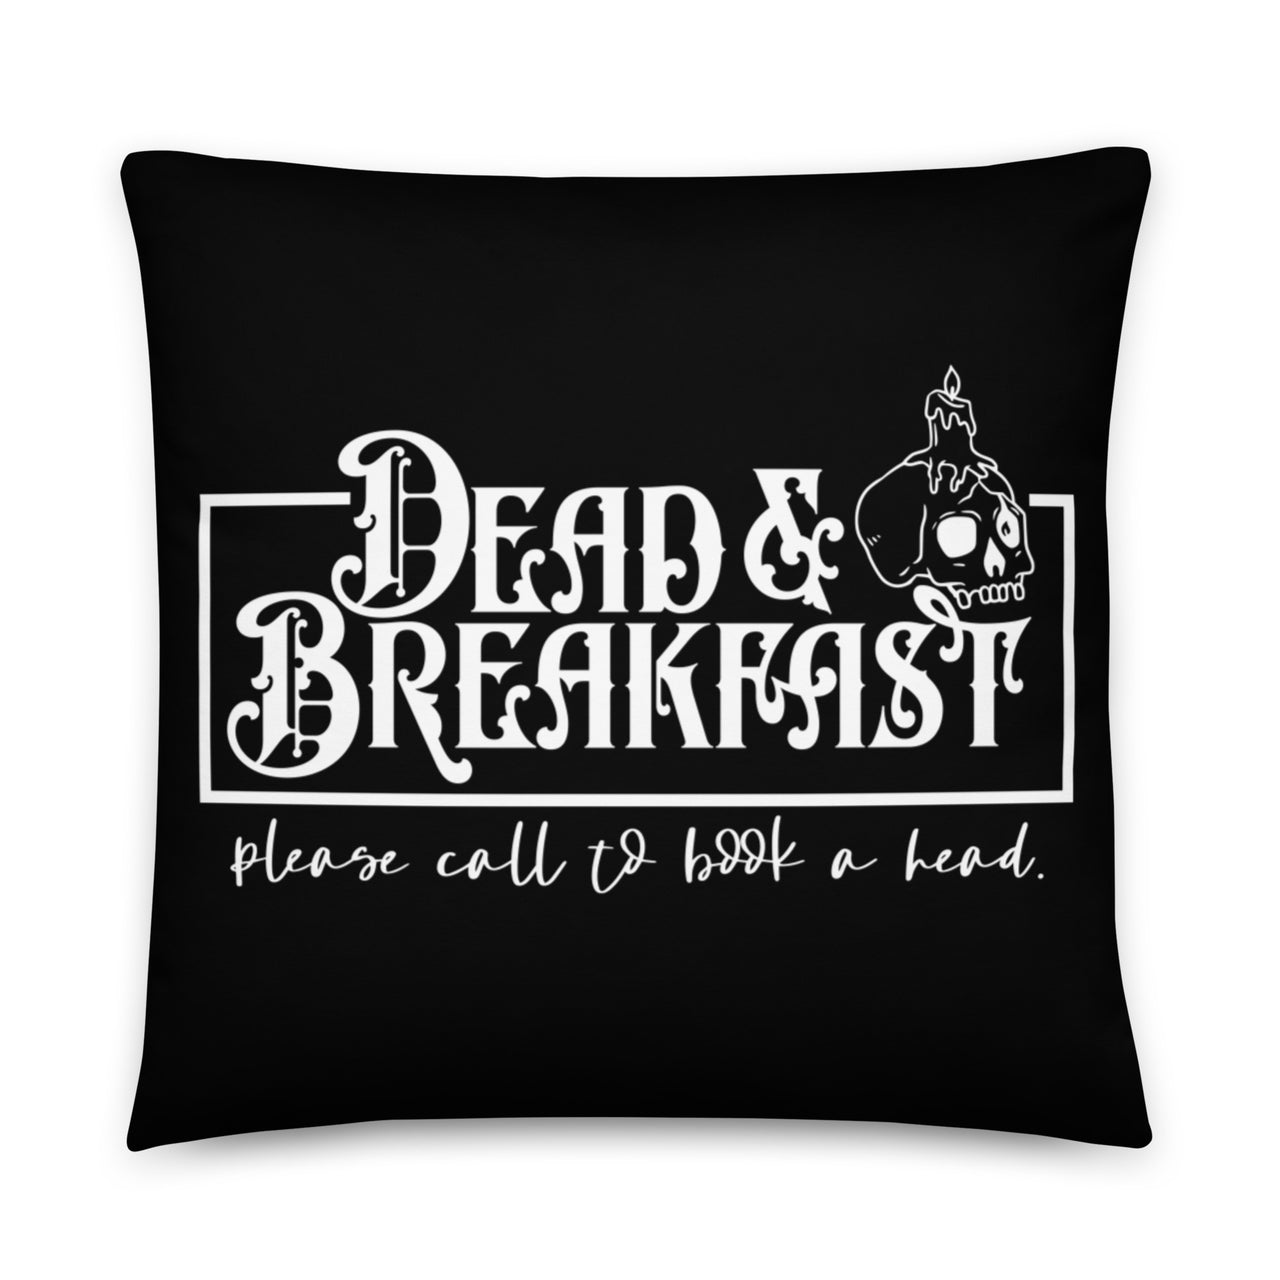 Dead and Breakfast Pillow, Please Call to Book a Head